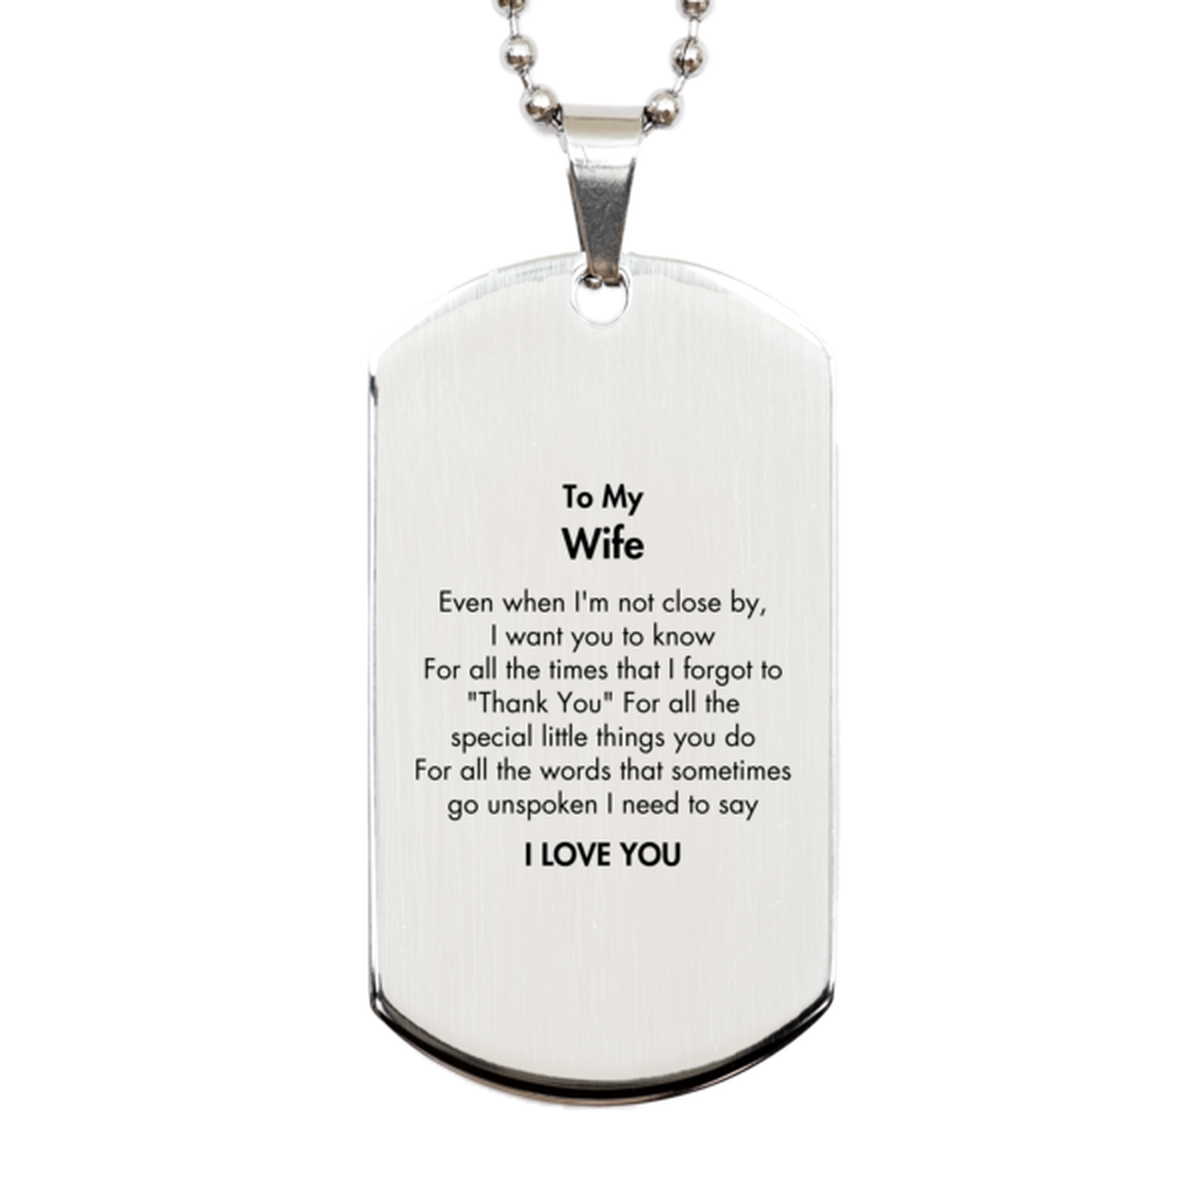 Thank You Gifts for Wife, Keepsake Silver Dog Tag Gifts for Wife Birthday Mother's day Father's Day Wife For all the words That sometimes go unspoken I need to say I LOVE YOU